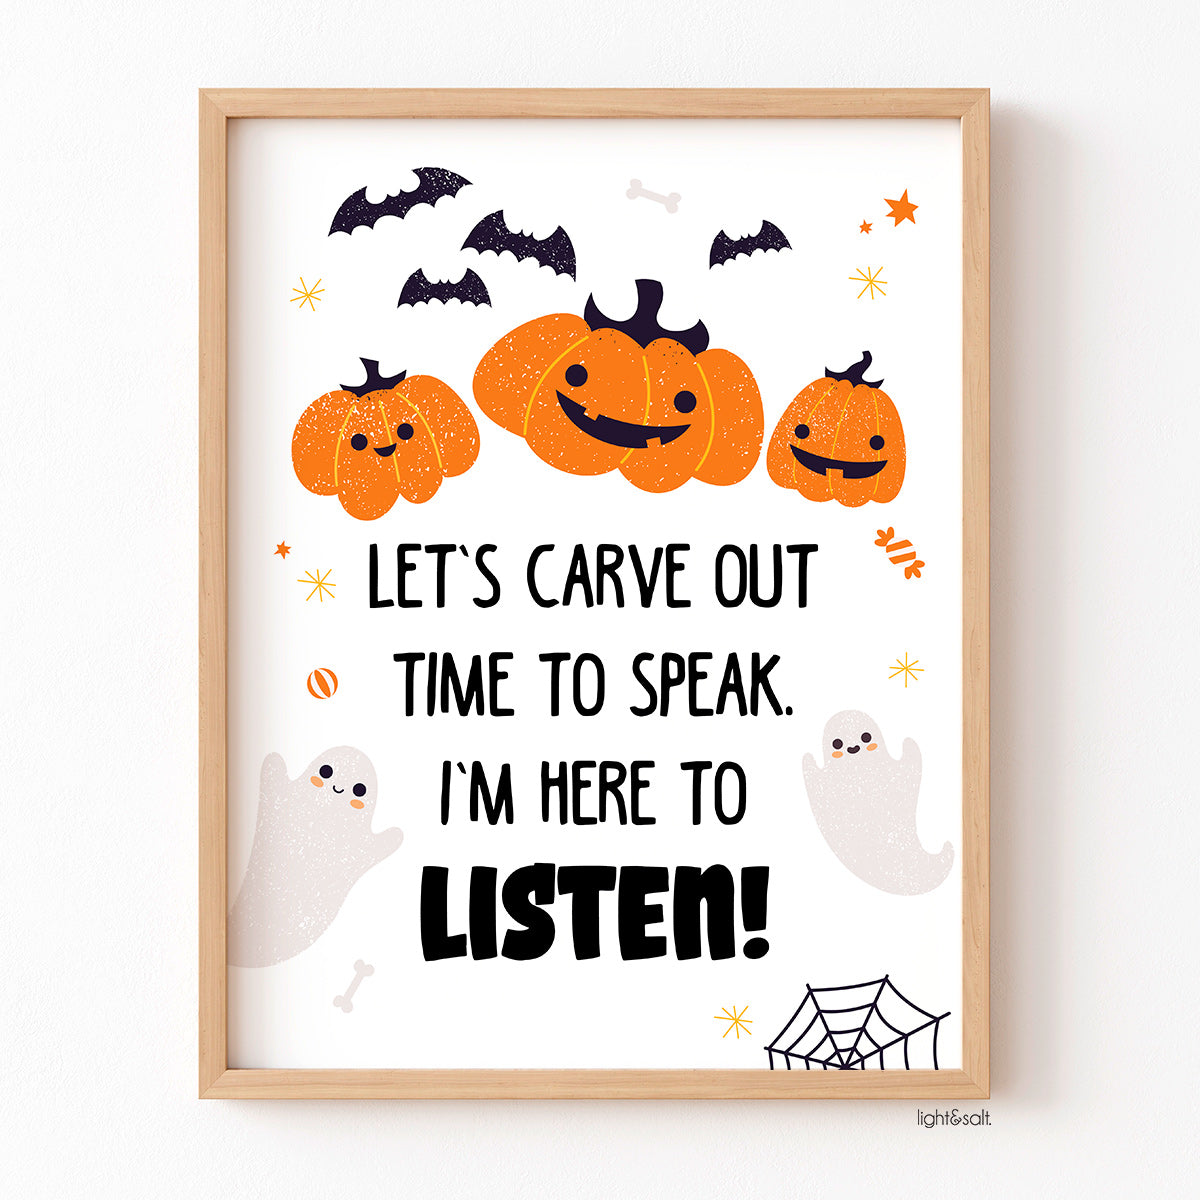 Let's carve out time to speak, I'm here to listen! Halloween mental health poster